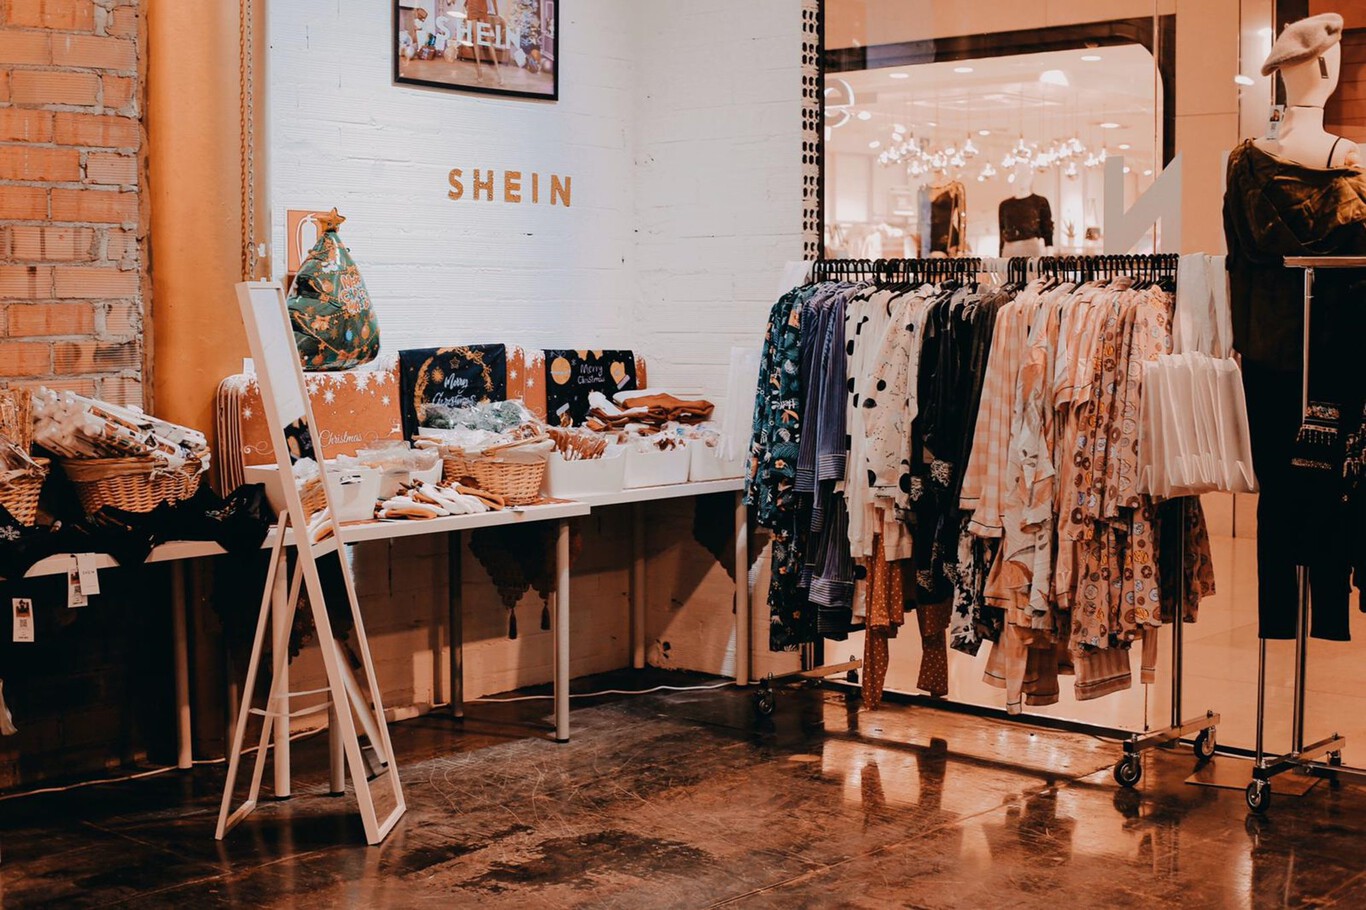 No IPO But Online Giant Shein To Open Tokyo Store This Month